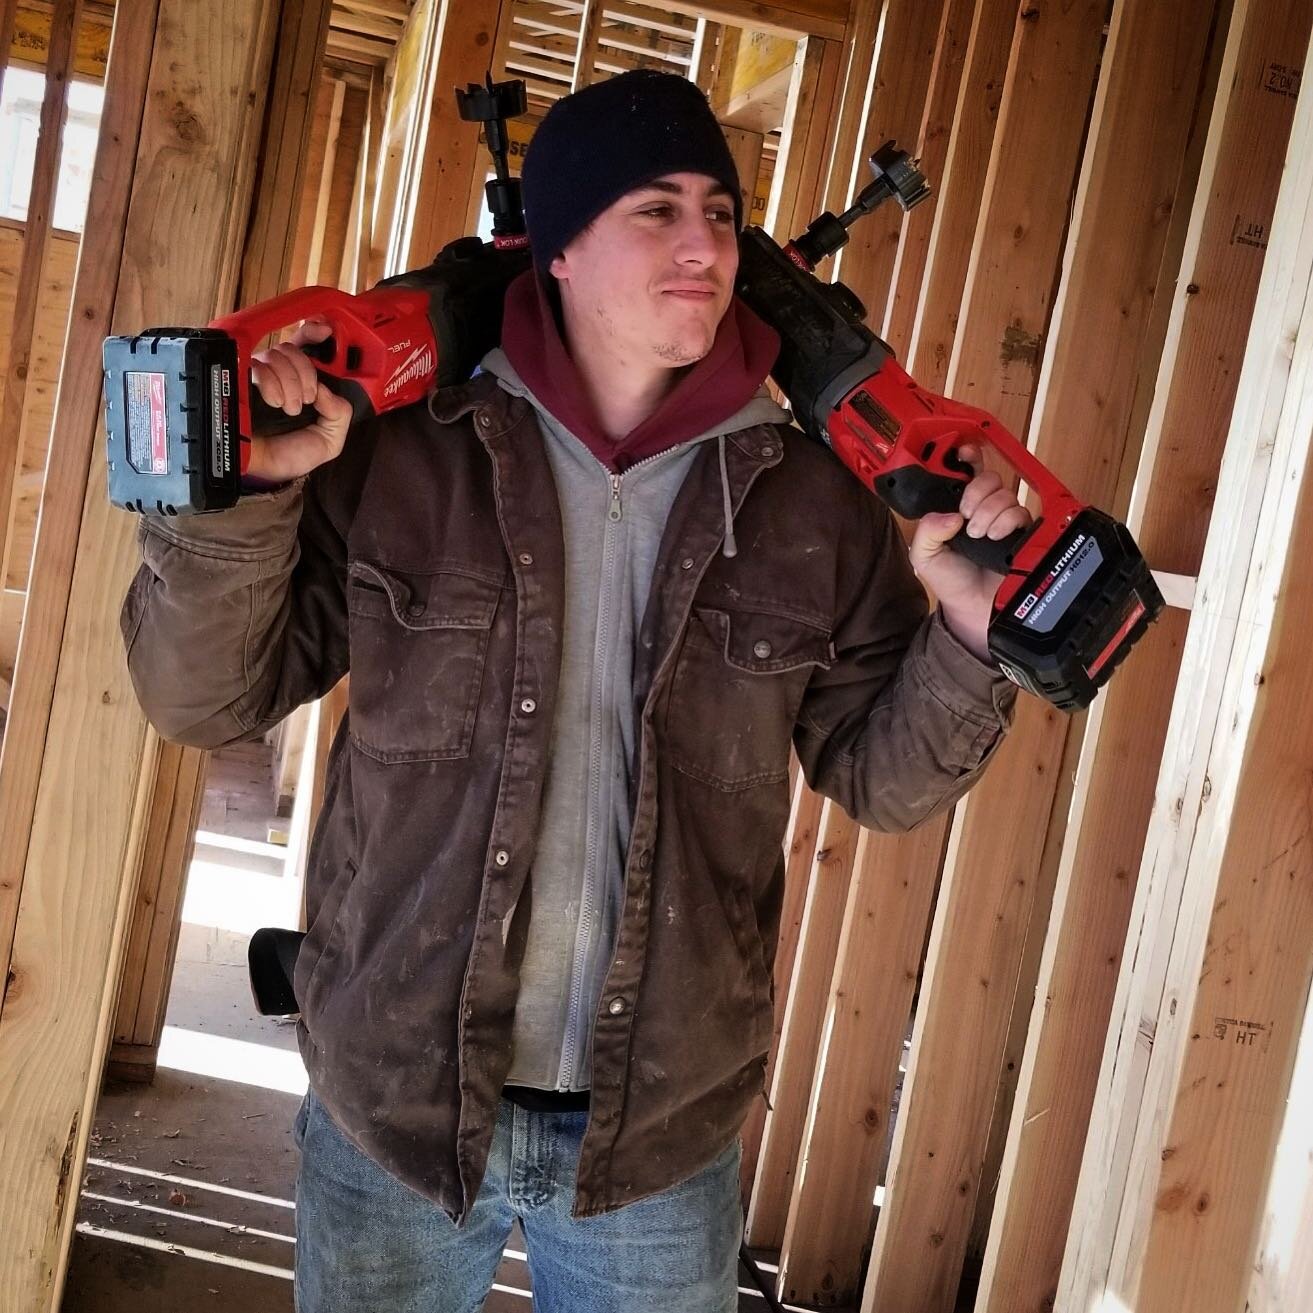 Time to test our new cordless Milwaukee Super Hawg Drills on NEW North Bergen 60 unit complex #milwaukeetool #milwaukeetools #powertools
#plumbing #plumber #plumbers #plumbinglife #construction #heating #plumberslife  #worldplumbers #waterheater #wat